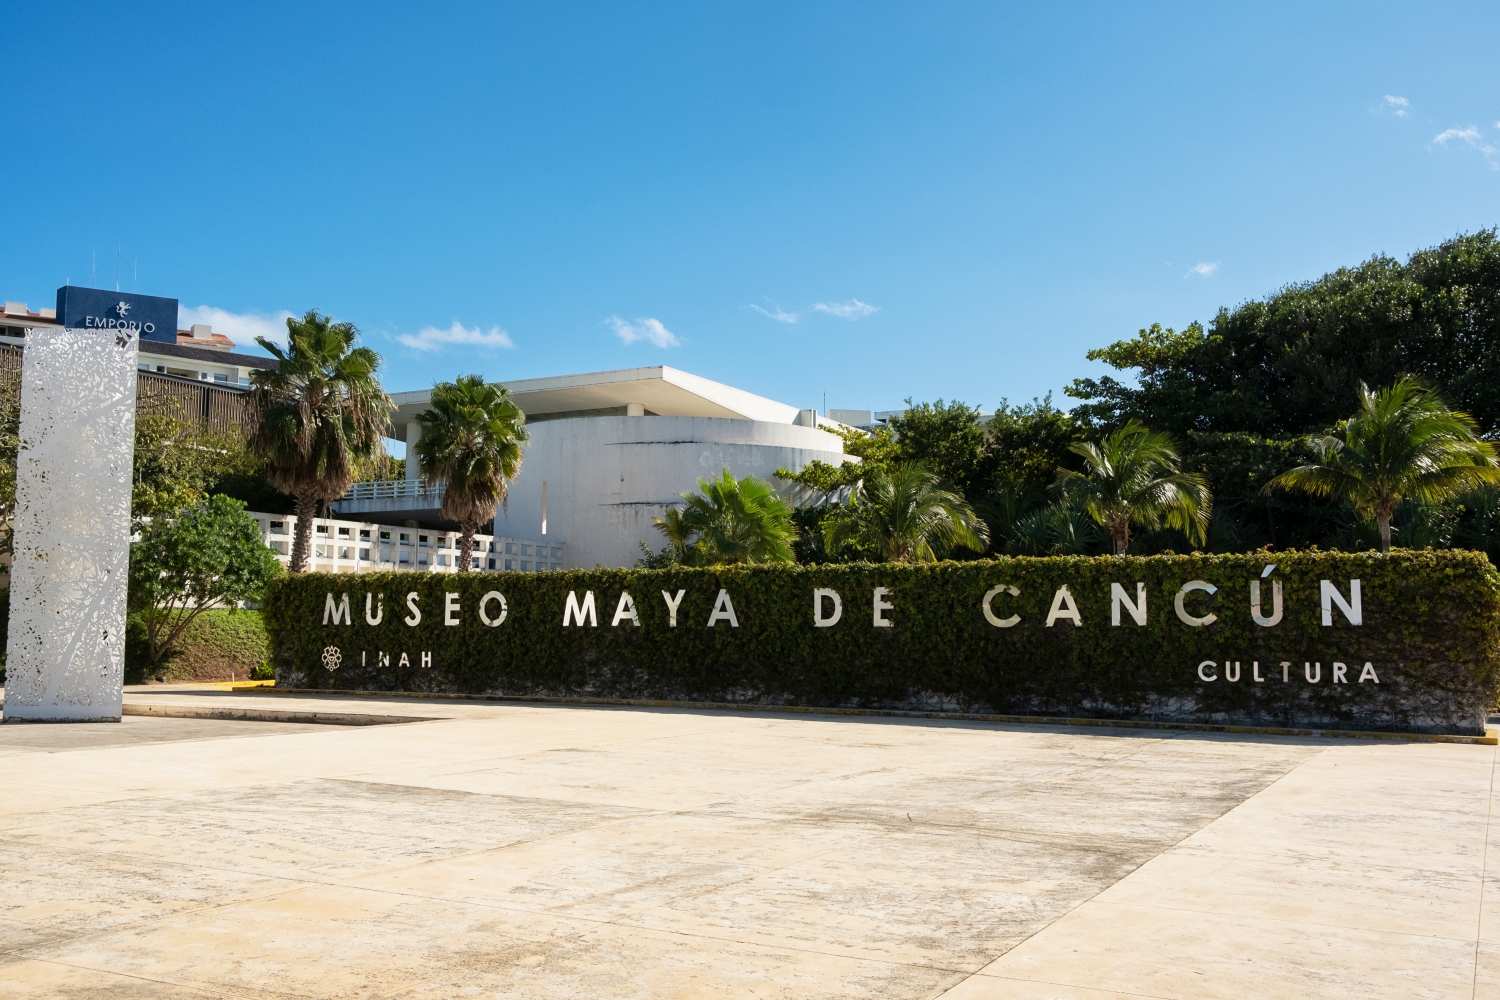 Tourist Activities in the Mayan Museum of Cancun